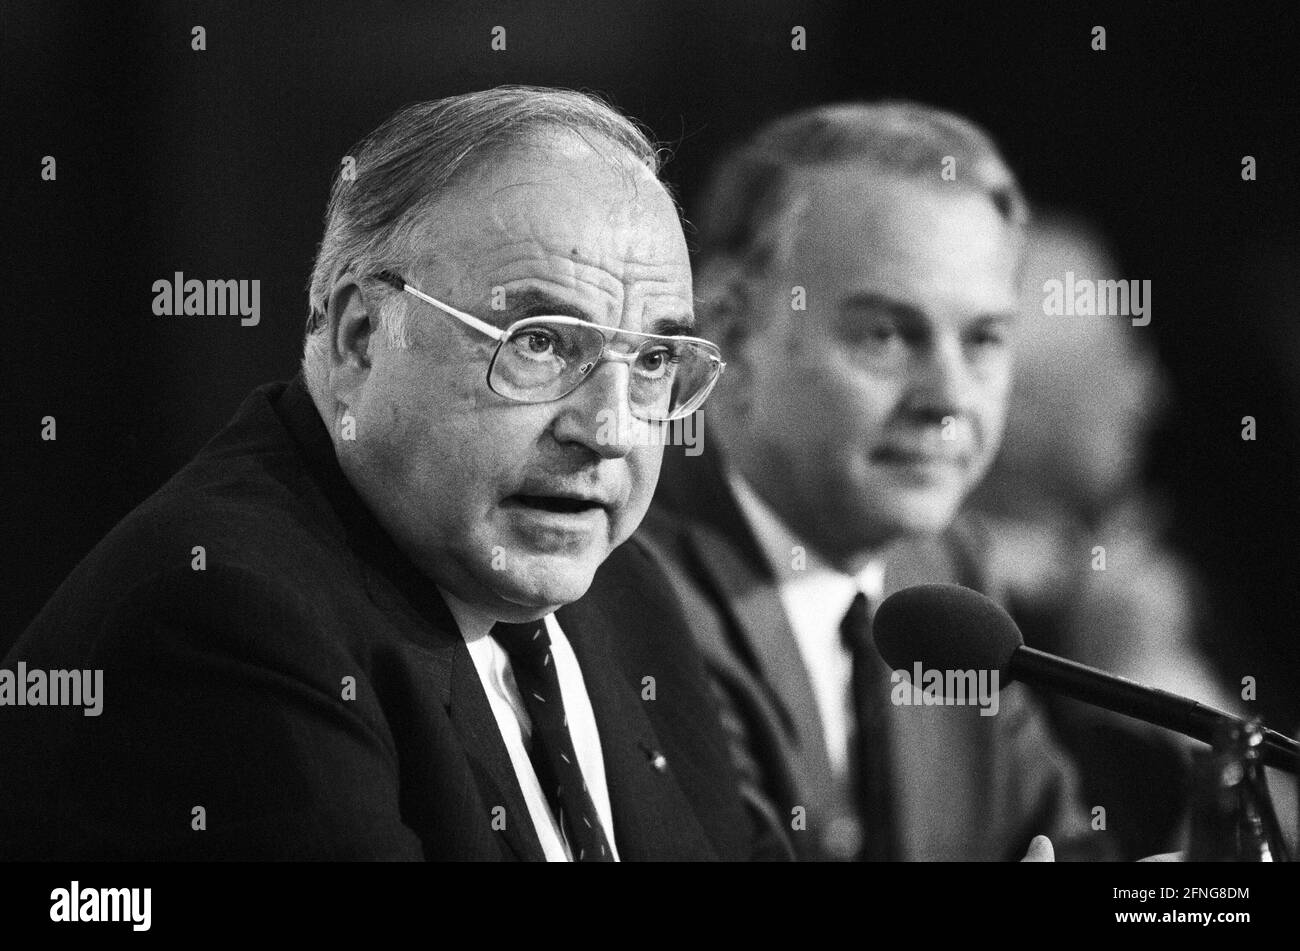 Germany, Hanover, 13.10.1989. Archive No: 09-62-16 CDU state party conference Lower Saxony Photo: CDU Federal Chairman Helmut Kohl and Ernst Albrecht, Minister President of Lower Saxony [automated translation] Stock Photo